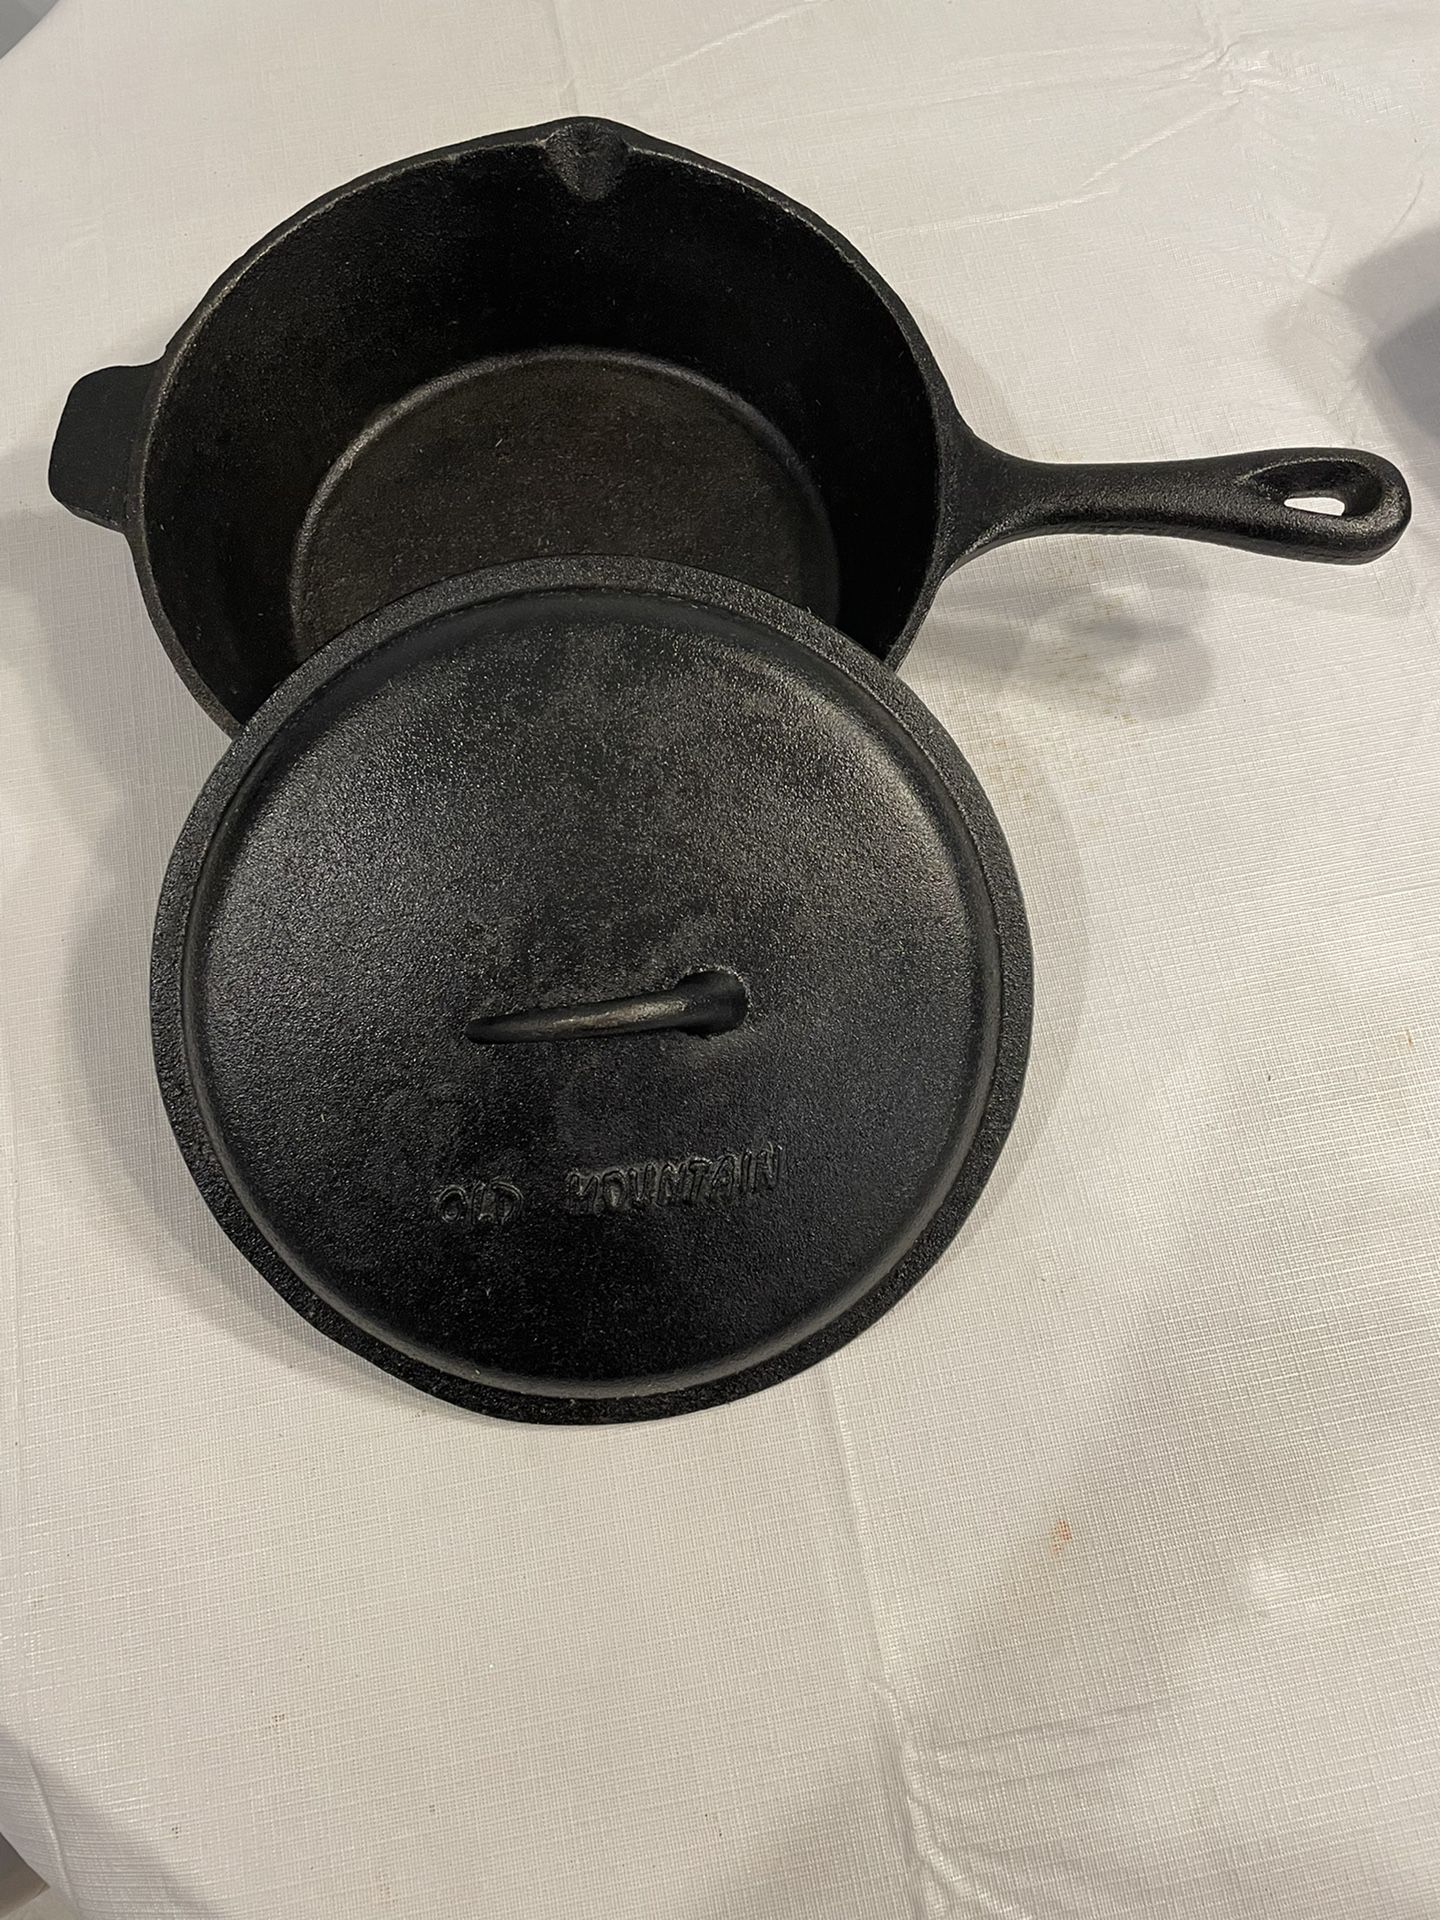 Old Mountain 10” Cast Iron Pan With Lid